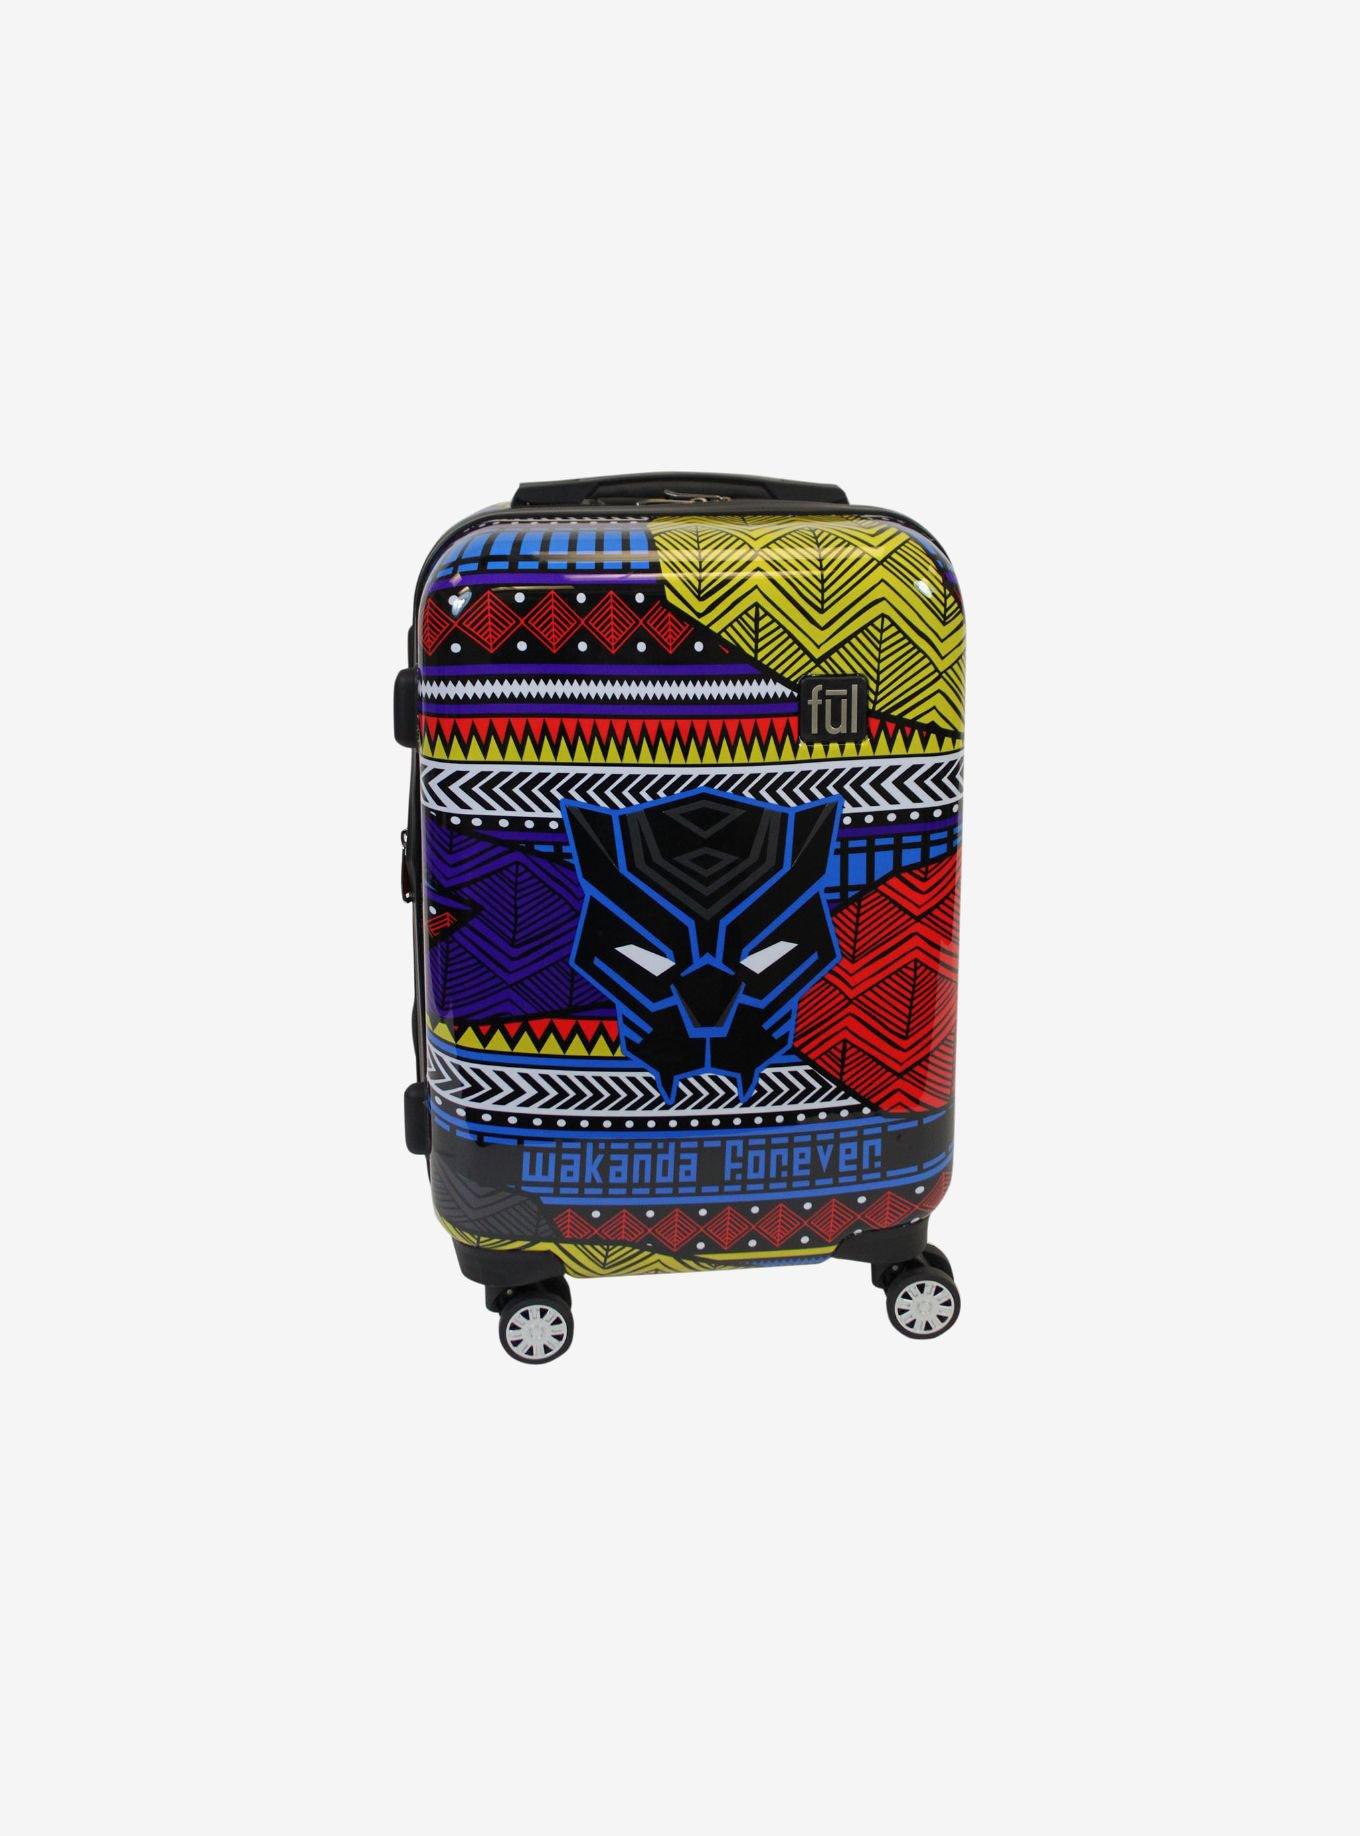 FUL Marvel Black Panther Geometric Art 21 Inch Hard Sided Rolling Luggage, , hi-res